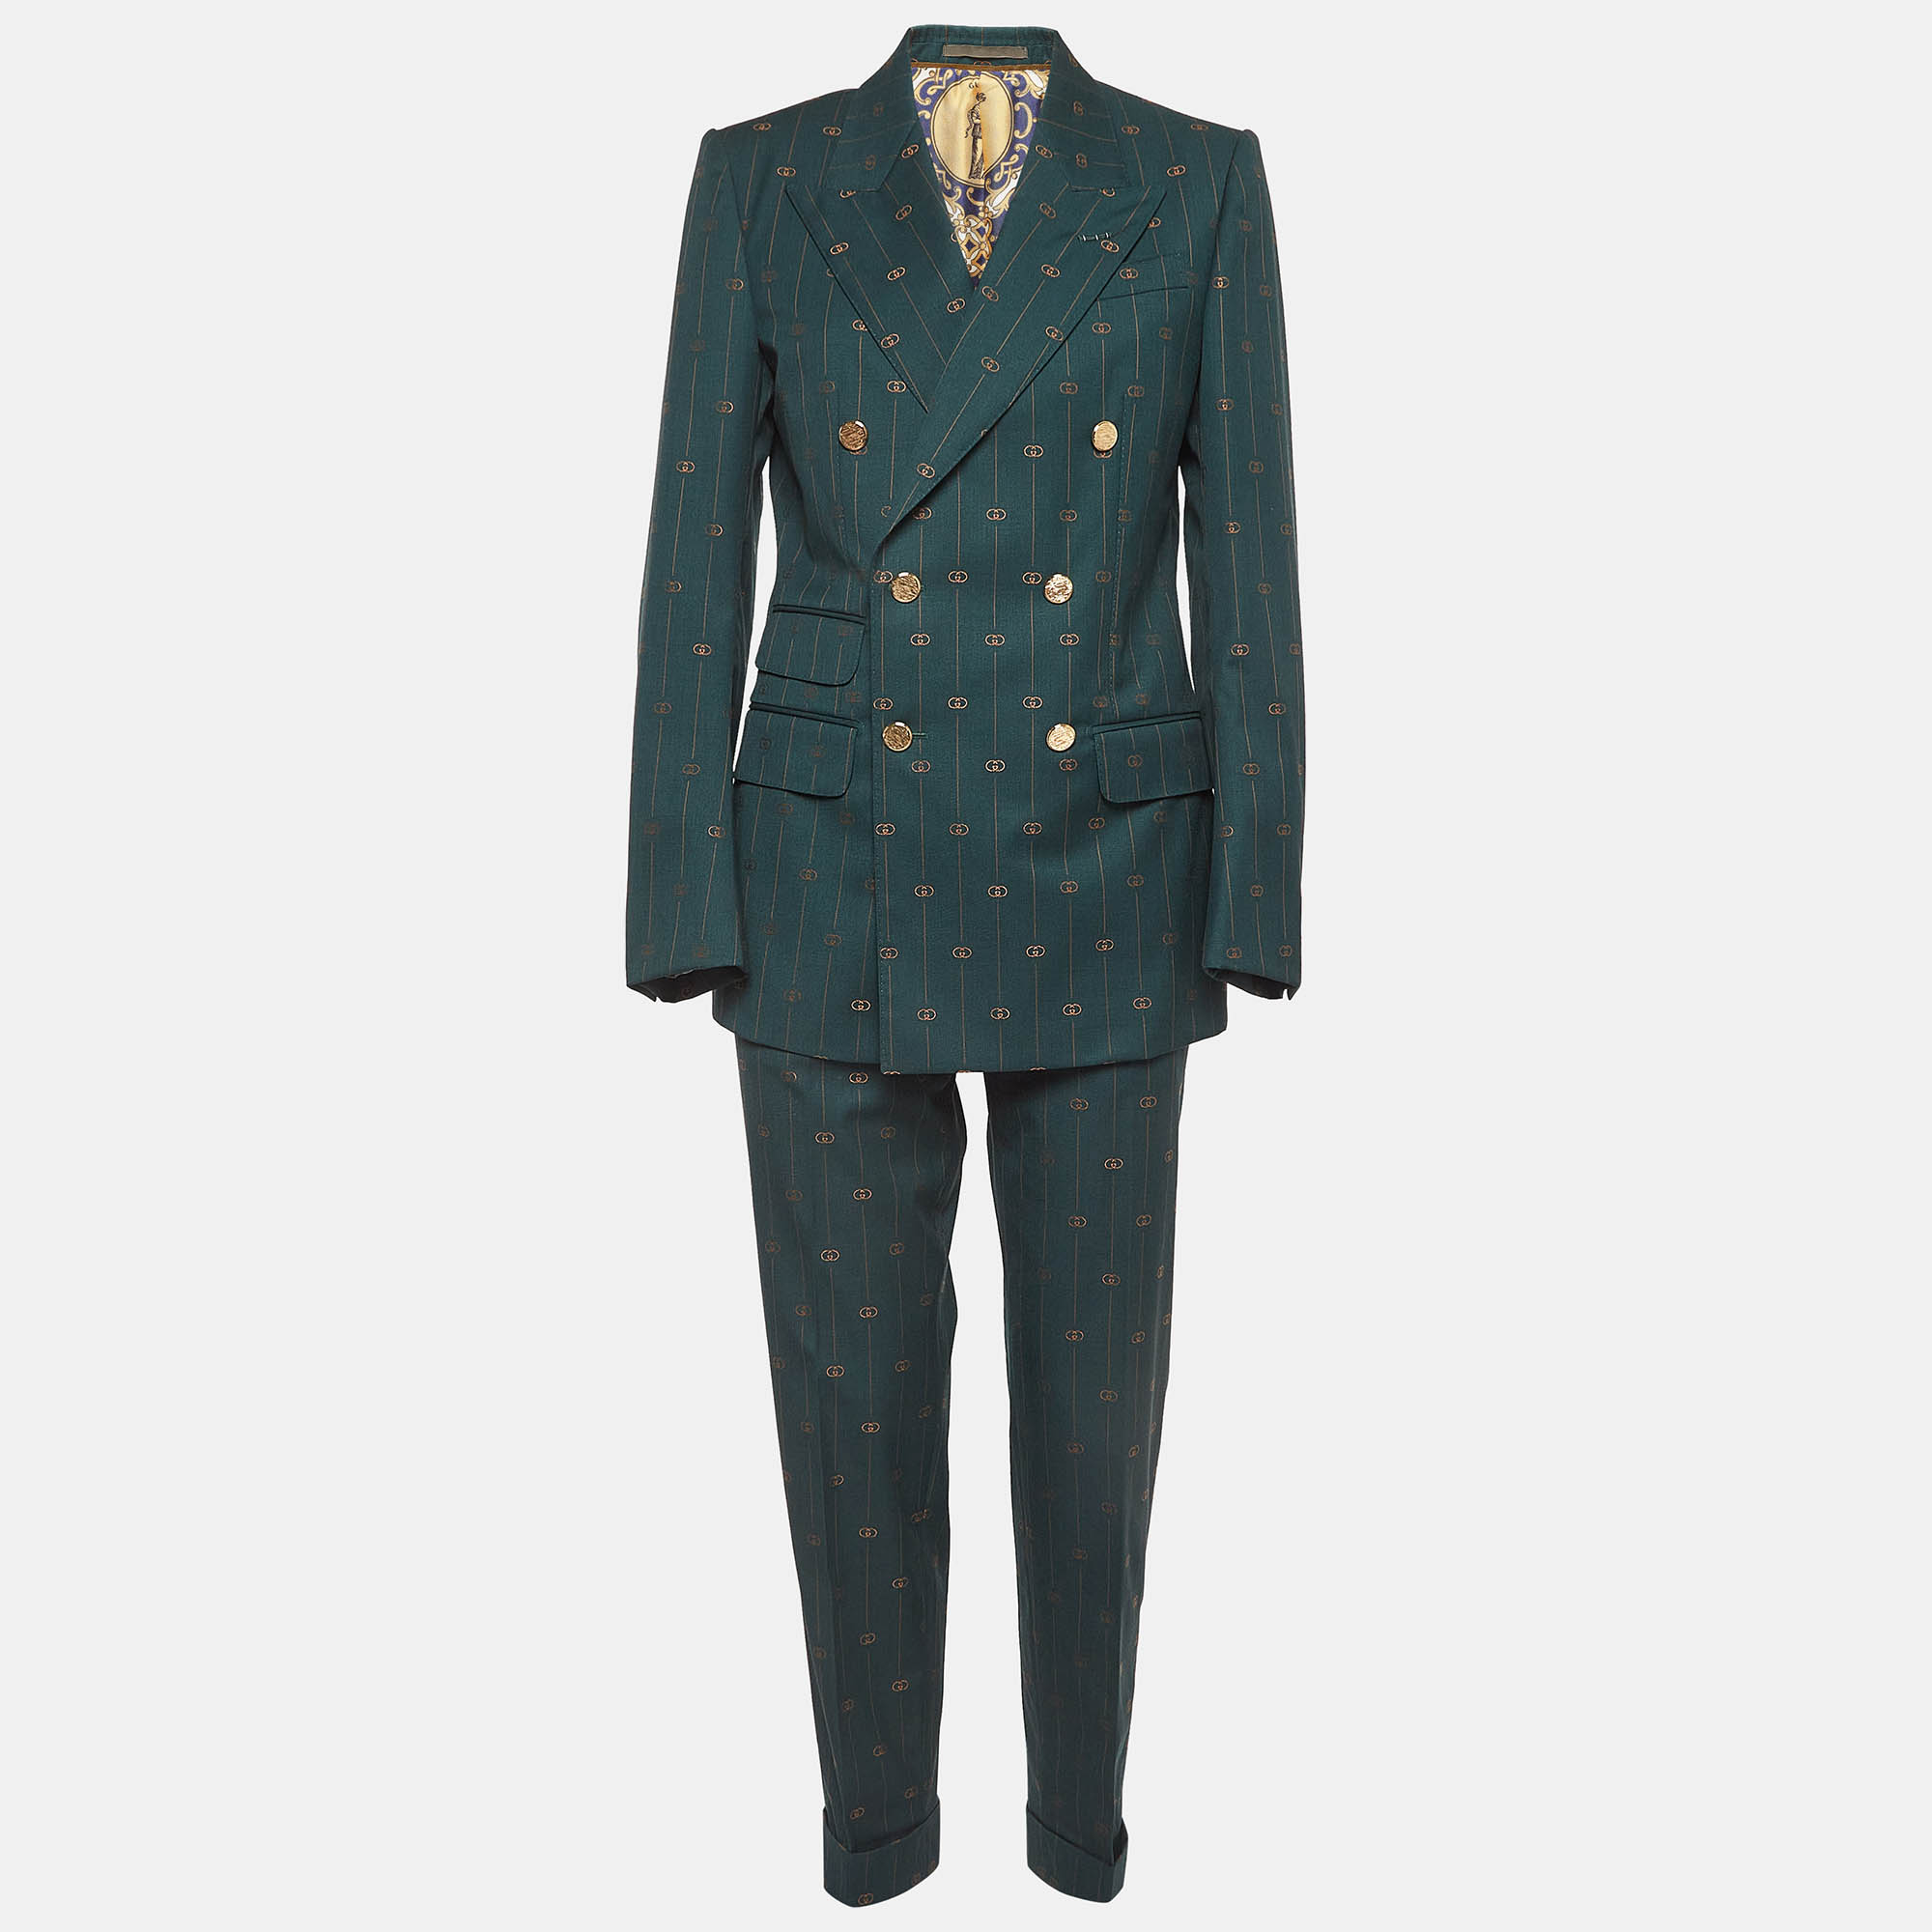 Gucci green pinstripe wool blazer and pants suit xs/s